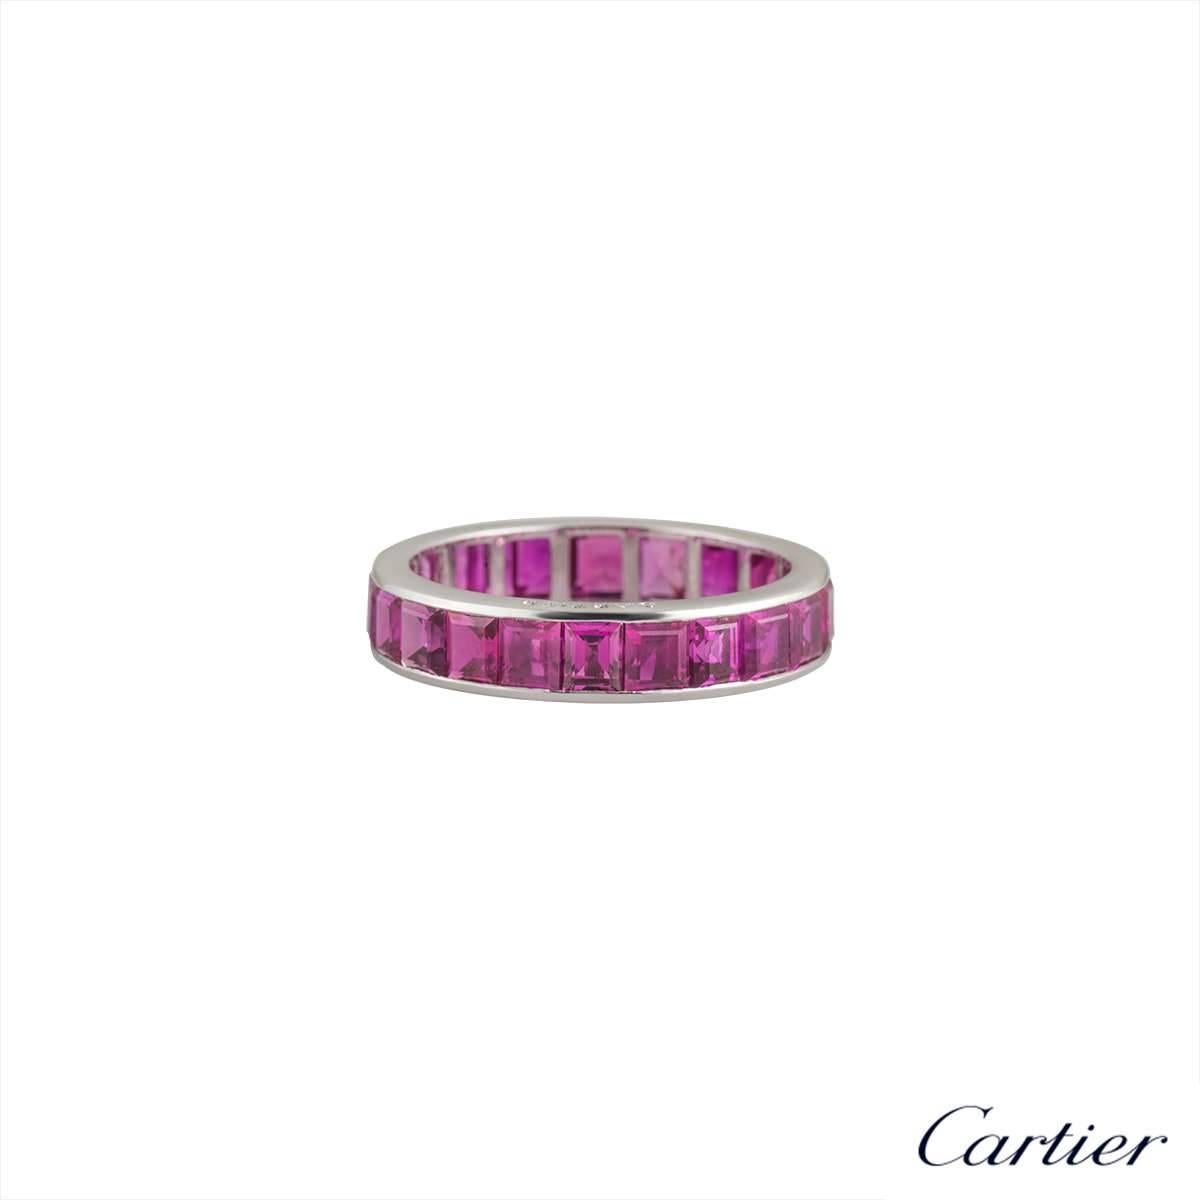 A stunning 18k white gold full eternity ring by Cartier. The ring is channel set throughout the centre with 22 square cut rubies, displaying a bright pink hue, totalling approximately 3.10ct. The 4.4mm wide ring is a US size 7, EU size 55 and UK